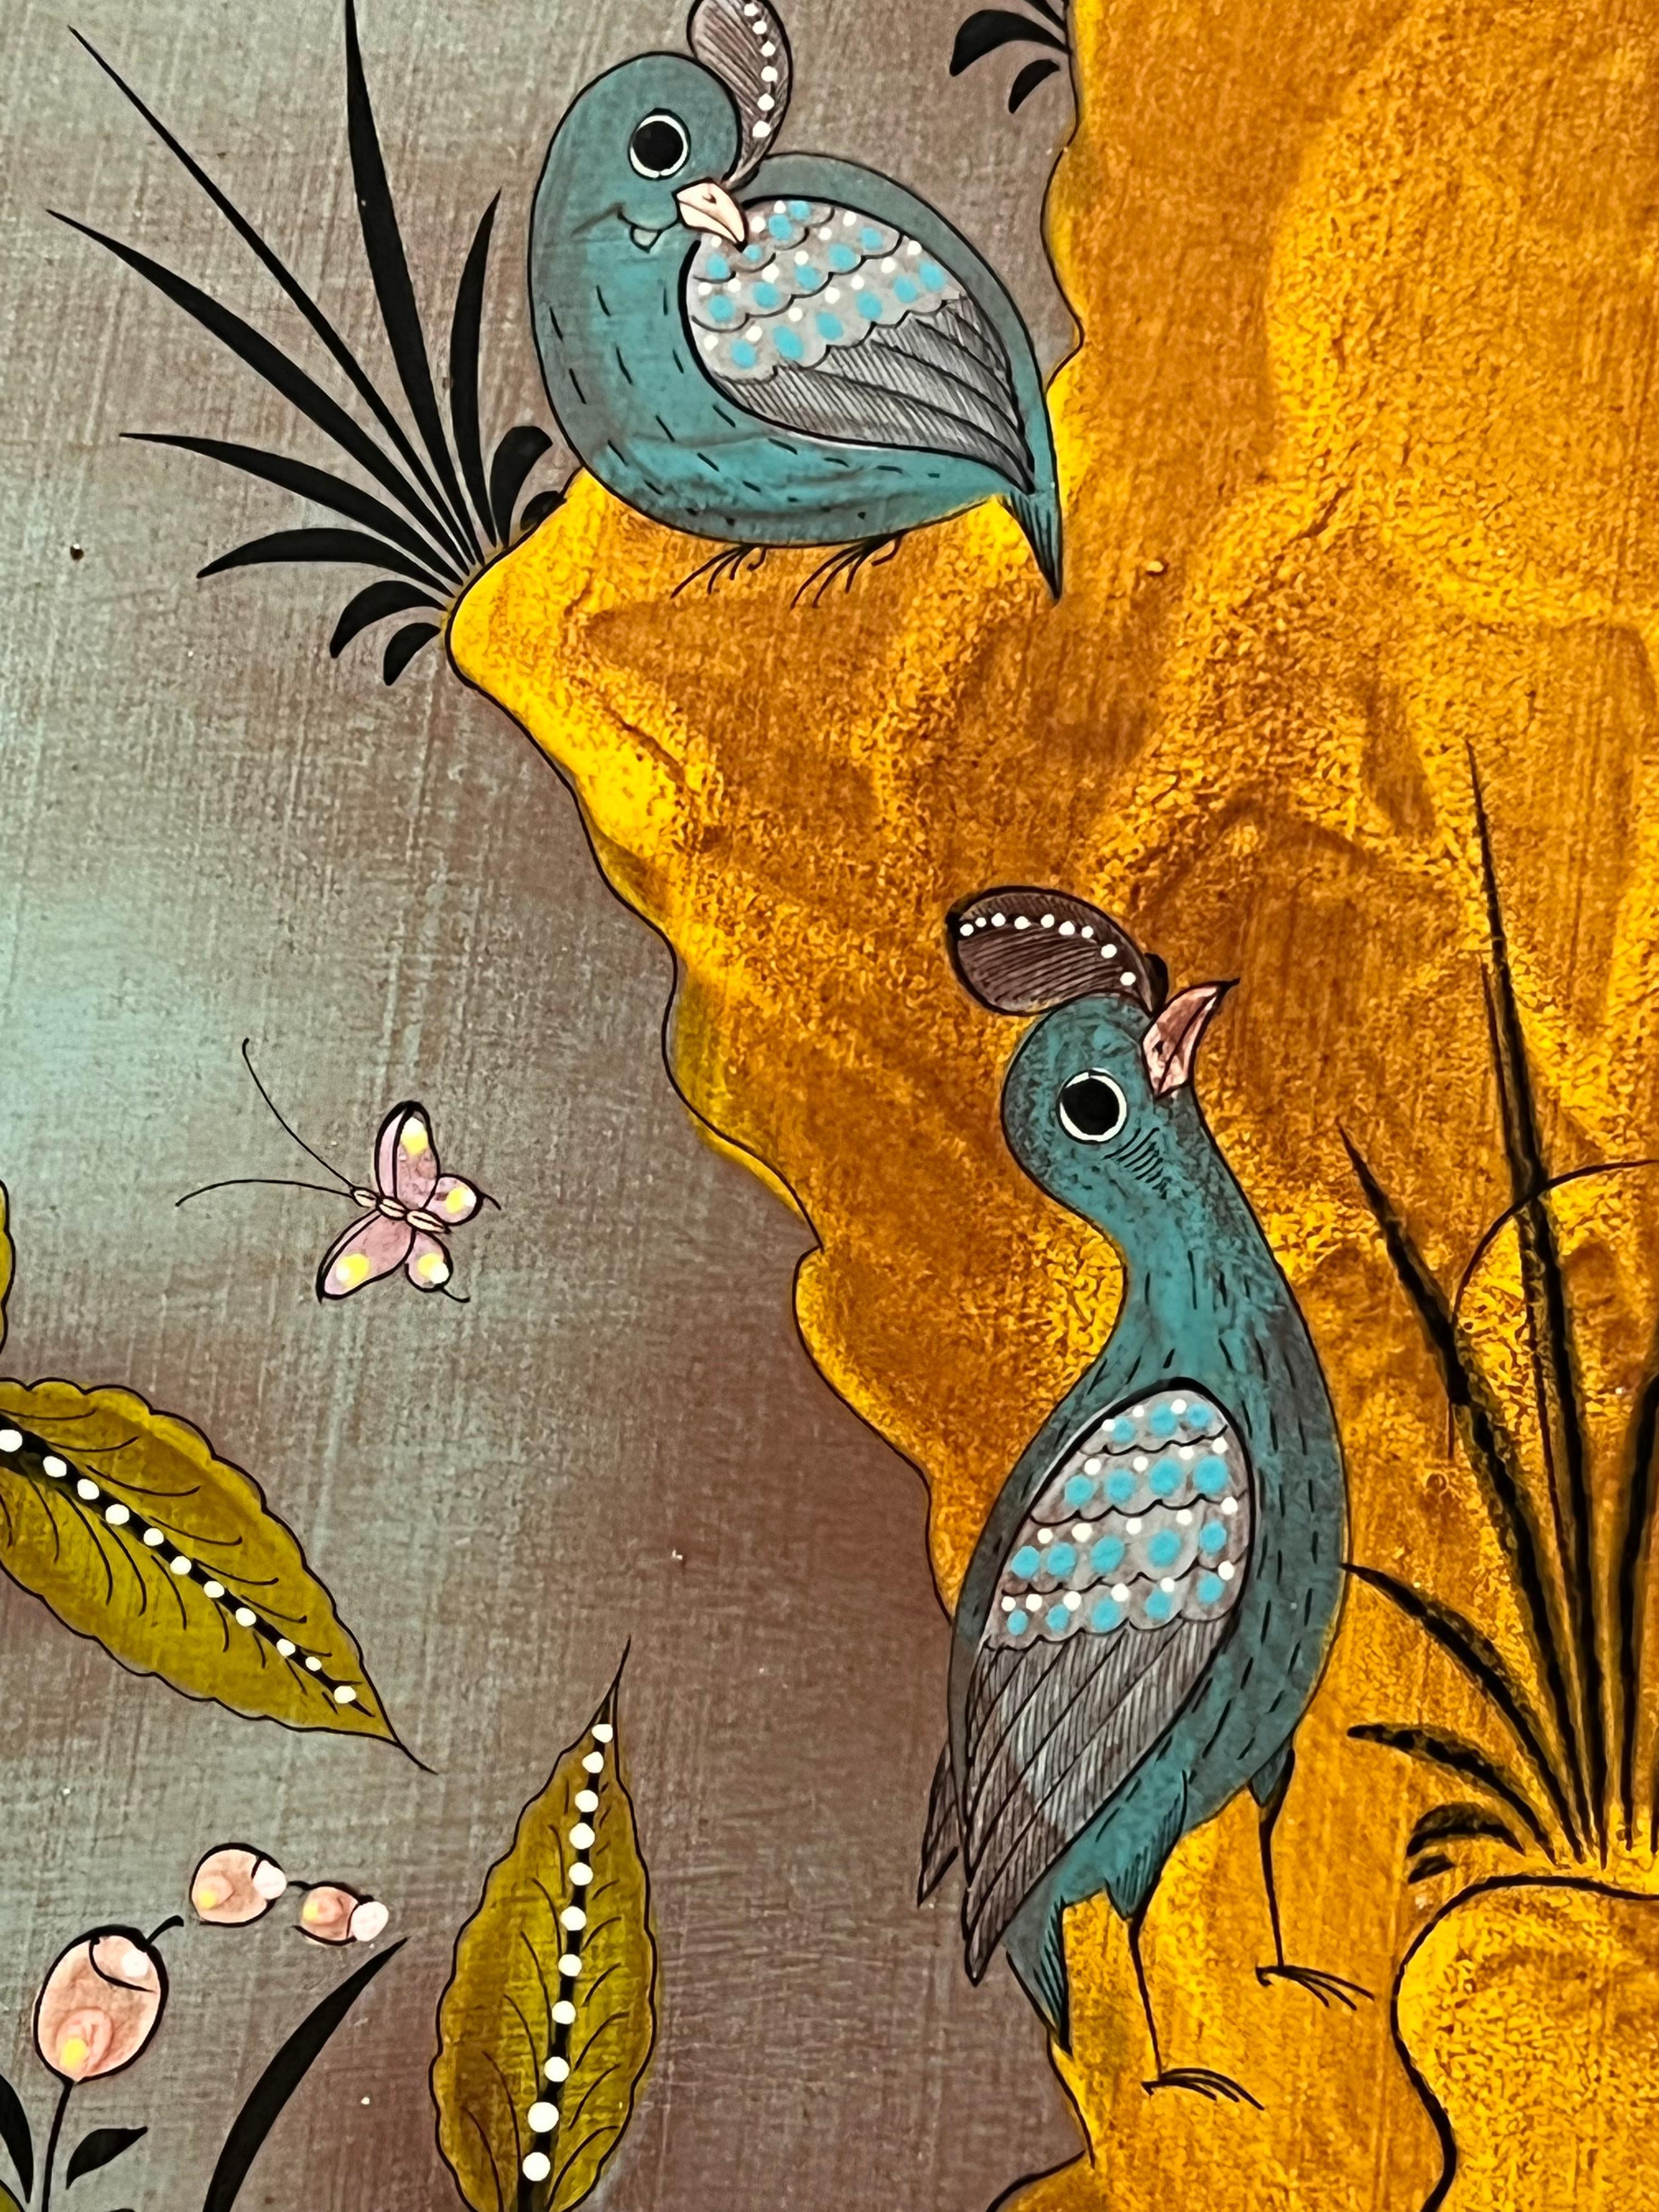 Arturo Alcala's art is inspired by folk art. He is famous for his modern impressionism and his lovingly detailed painting of birds and animals.
His panel paintings are reminiscent of ancient Mexican earthenware from the years 1940 and other styles